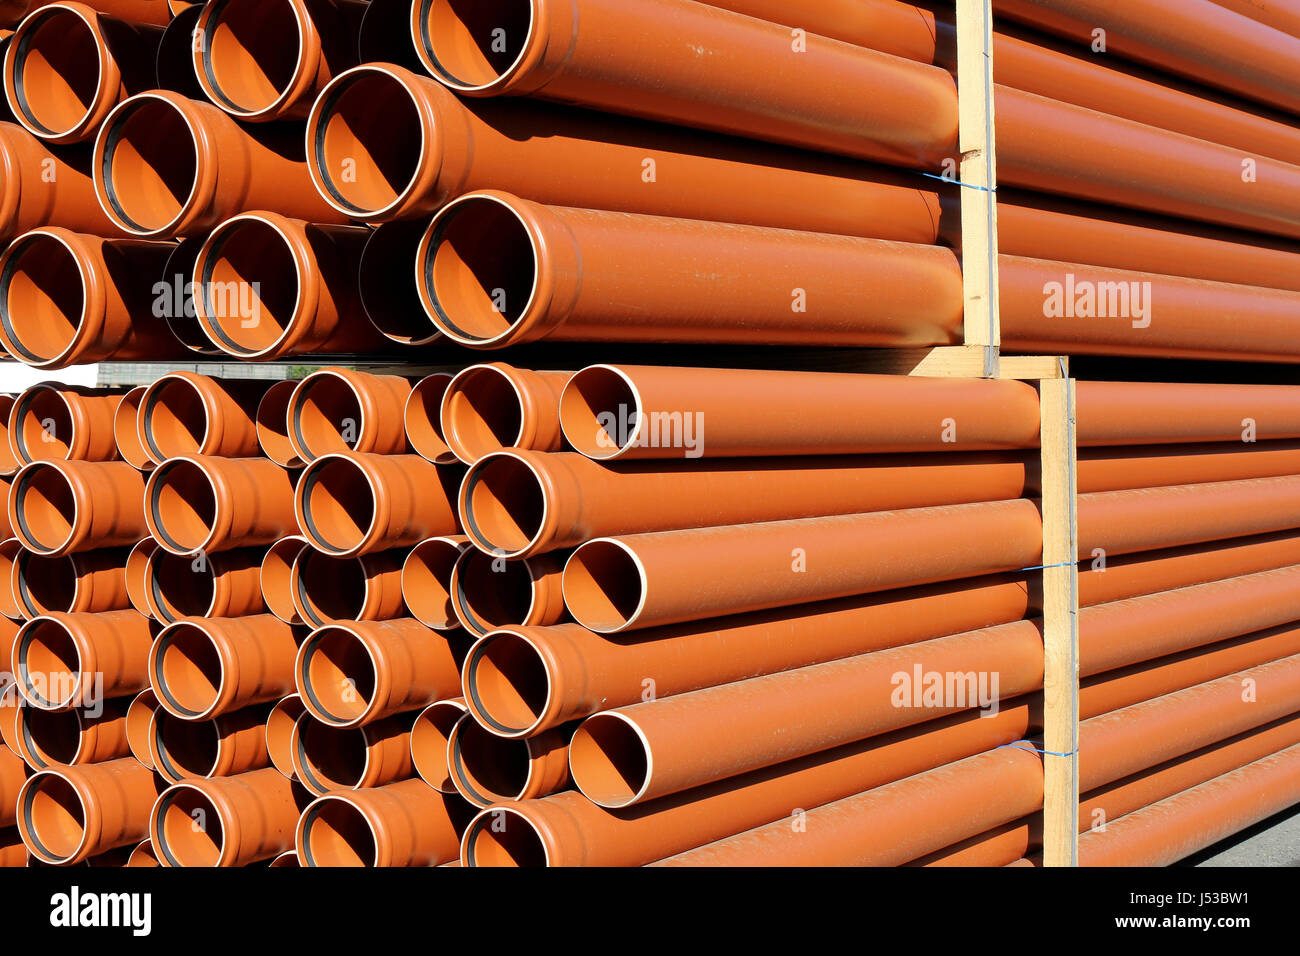 pallet of sewer pipes Stock Photo